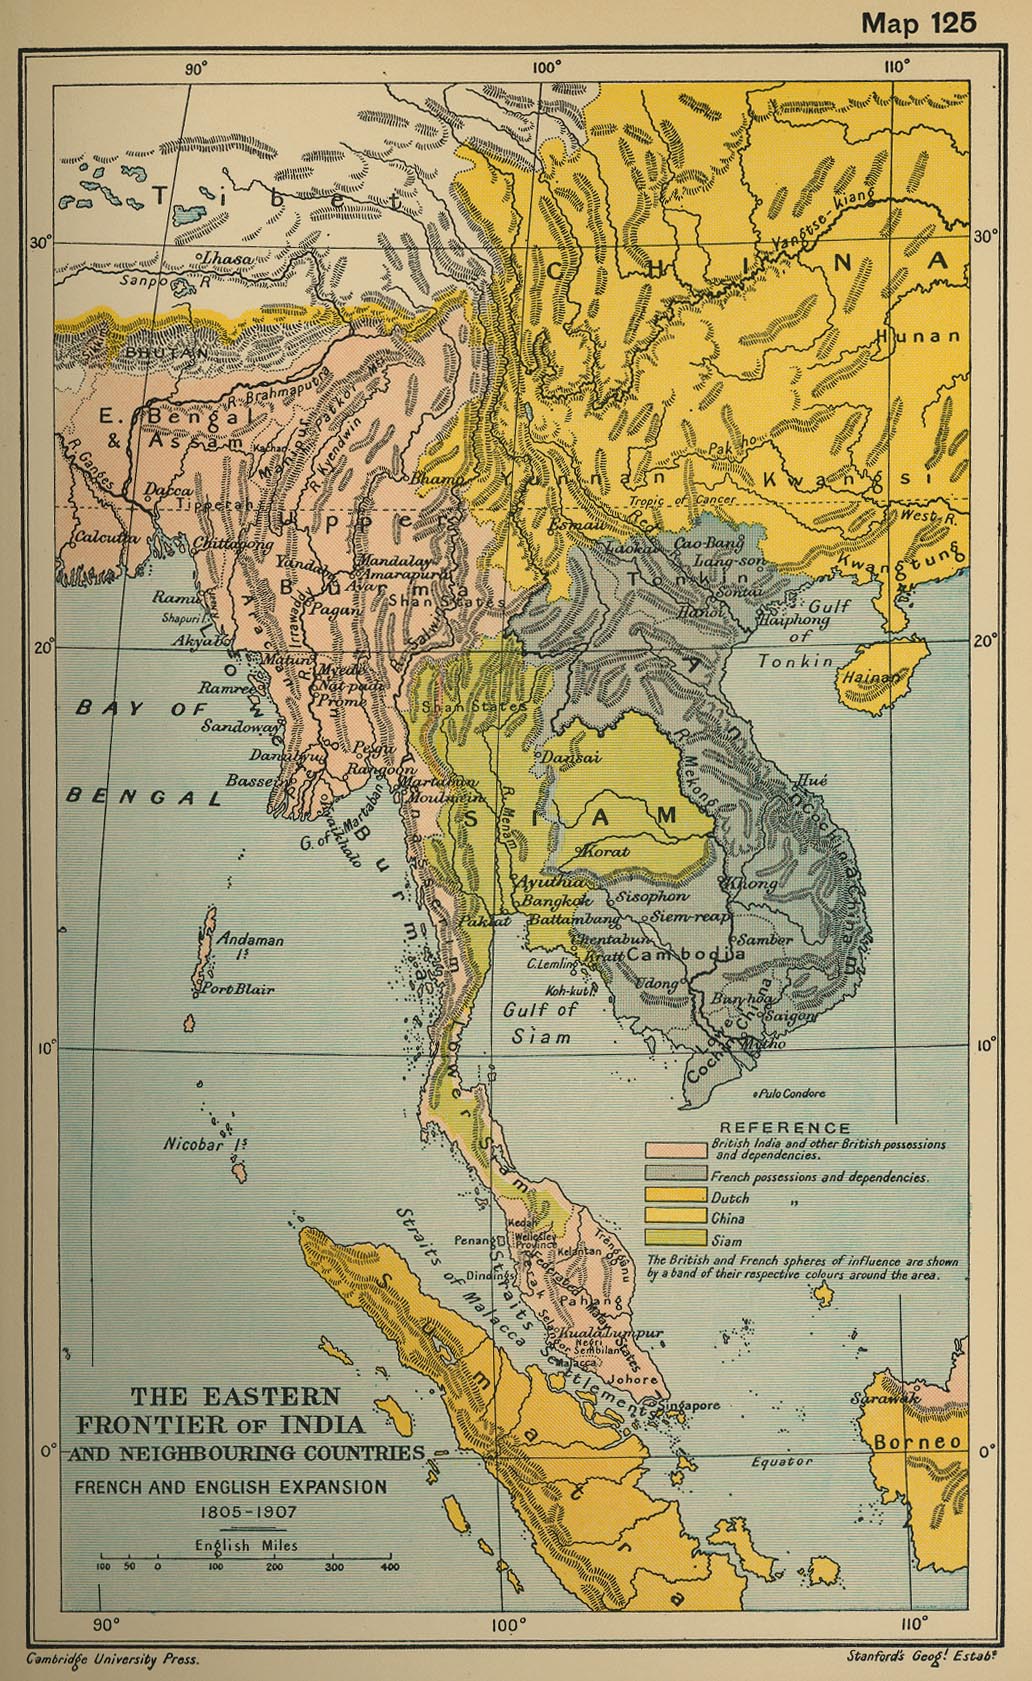 Map of Southeast Aisa: Eastern Frontier of India and Neighboring Countries: The French and English Expansion 1805-1907